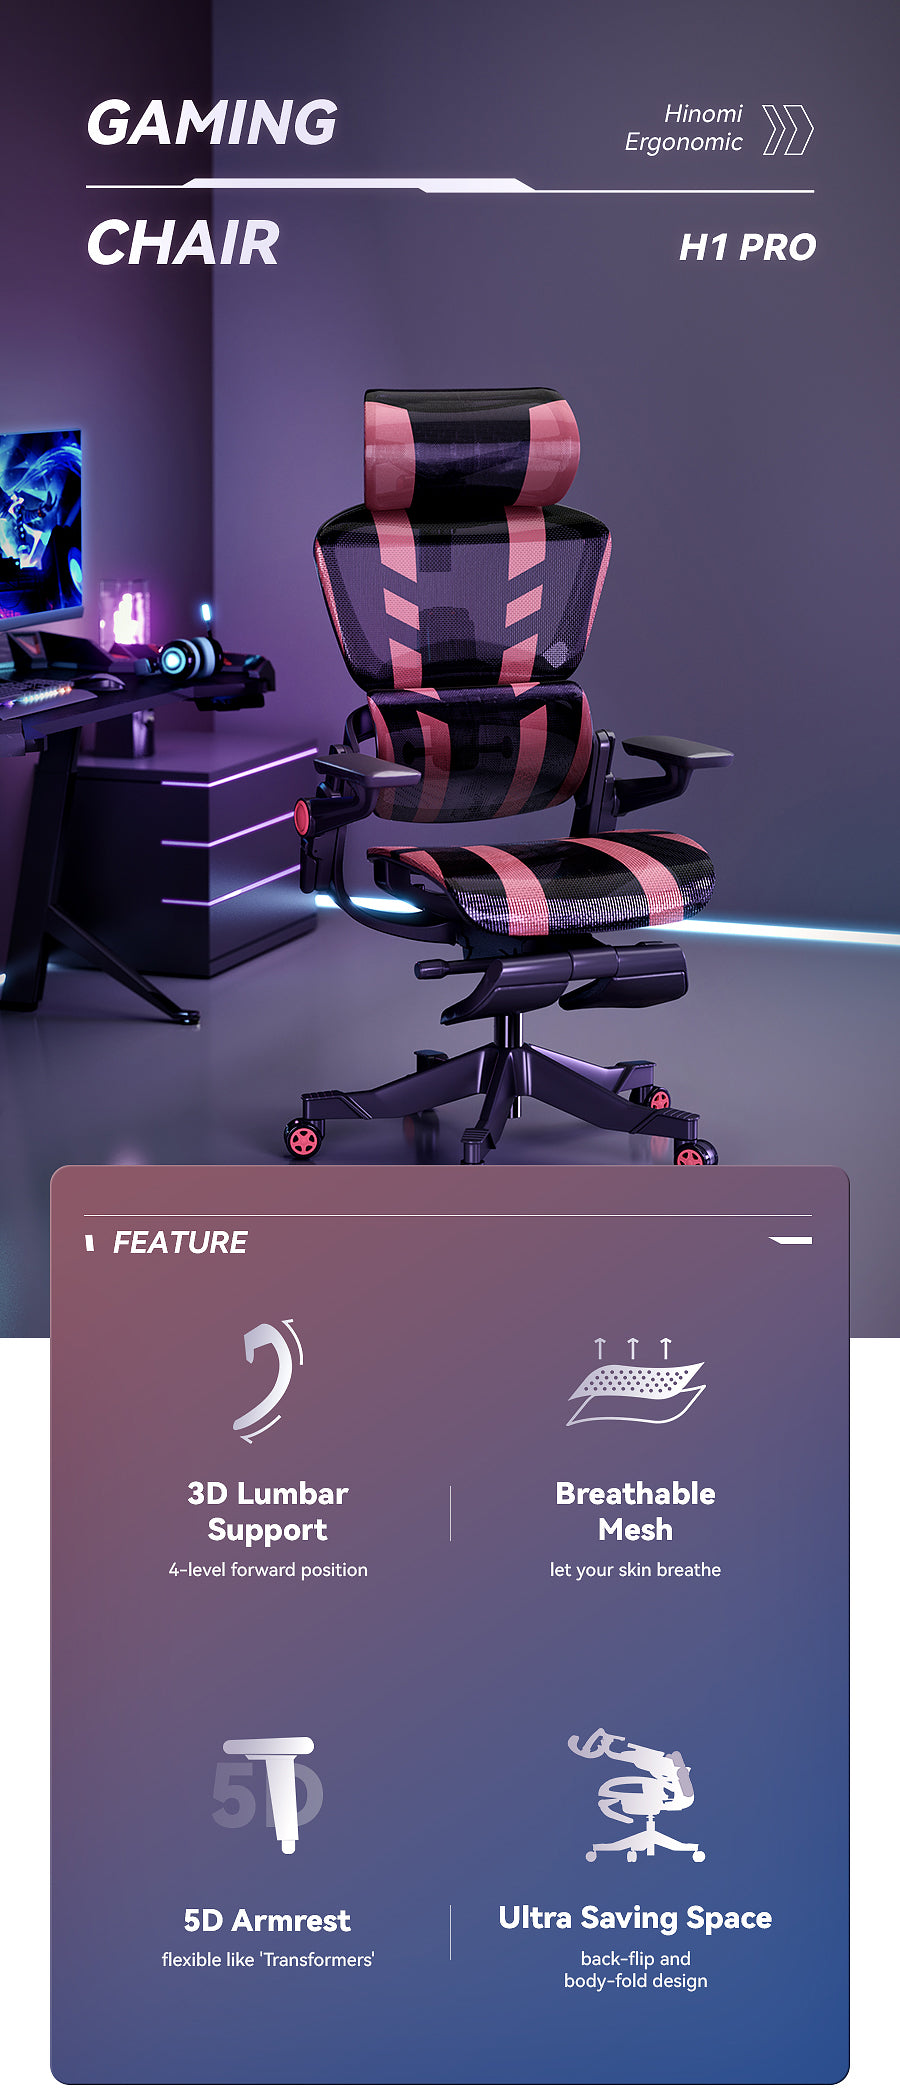 Hinomi Gaming Chair Features